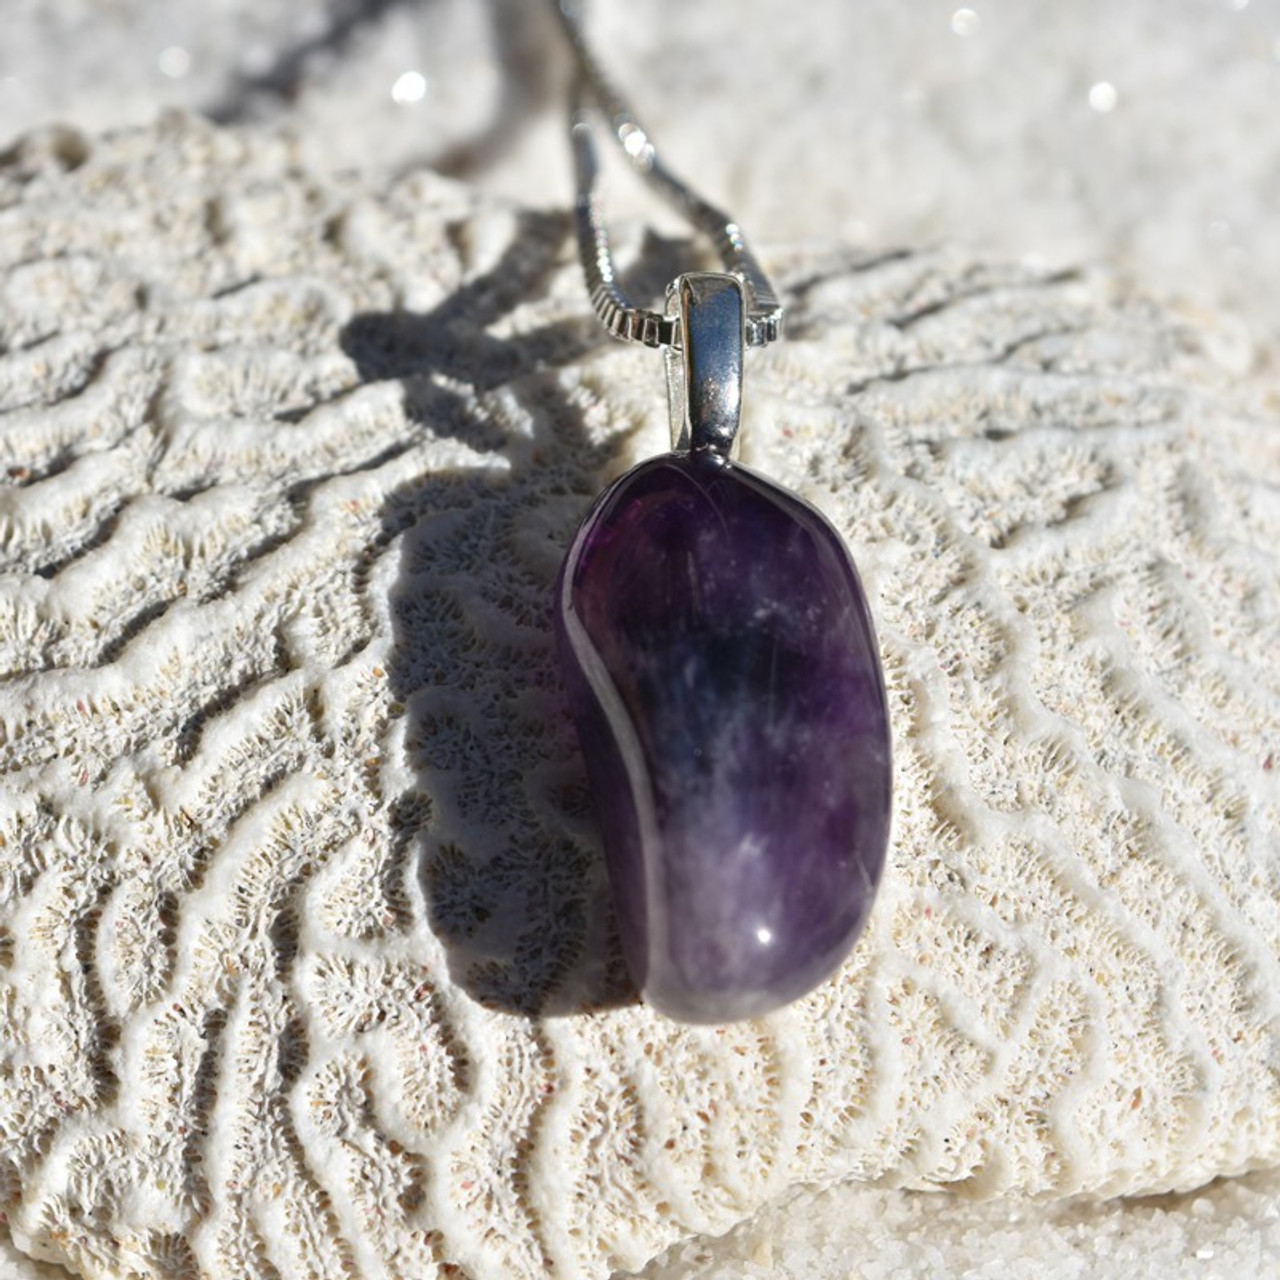 Amethyst Stone Pendant and Necklace - Choose Sterling Silver Chain or Leather Cord - Quantity of 1 - Made to Order